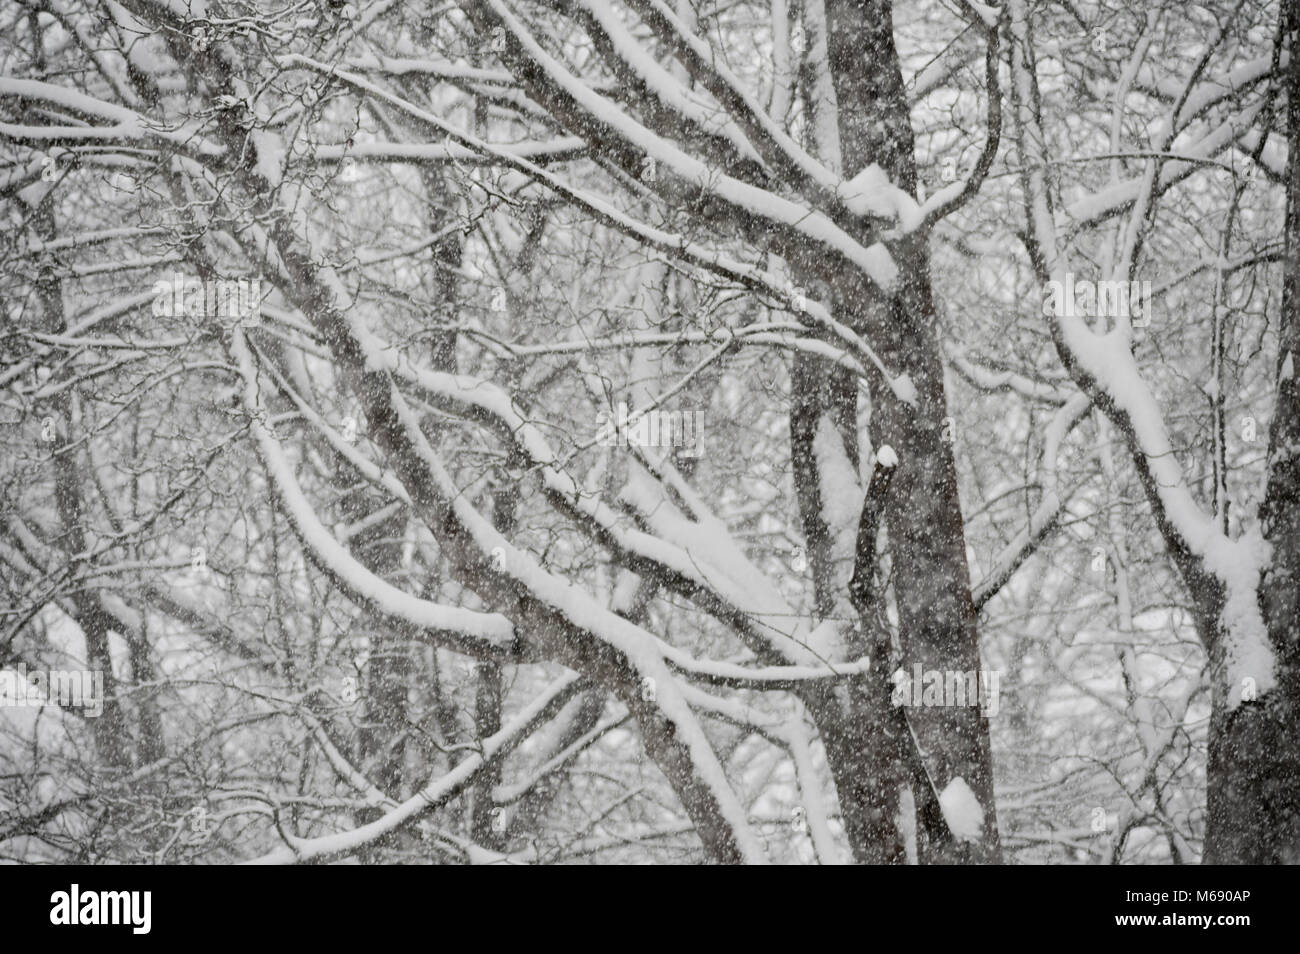 The beast from the East heavy dry snow falling in blizzard with ash, birch, maple, sycamore, trees in background almost obscured with blanket snowfall Stock Photo